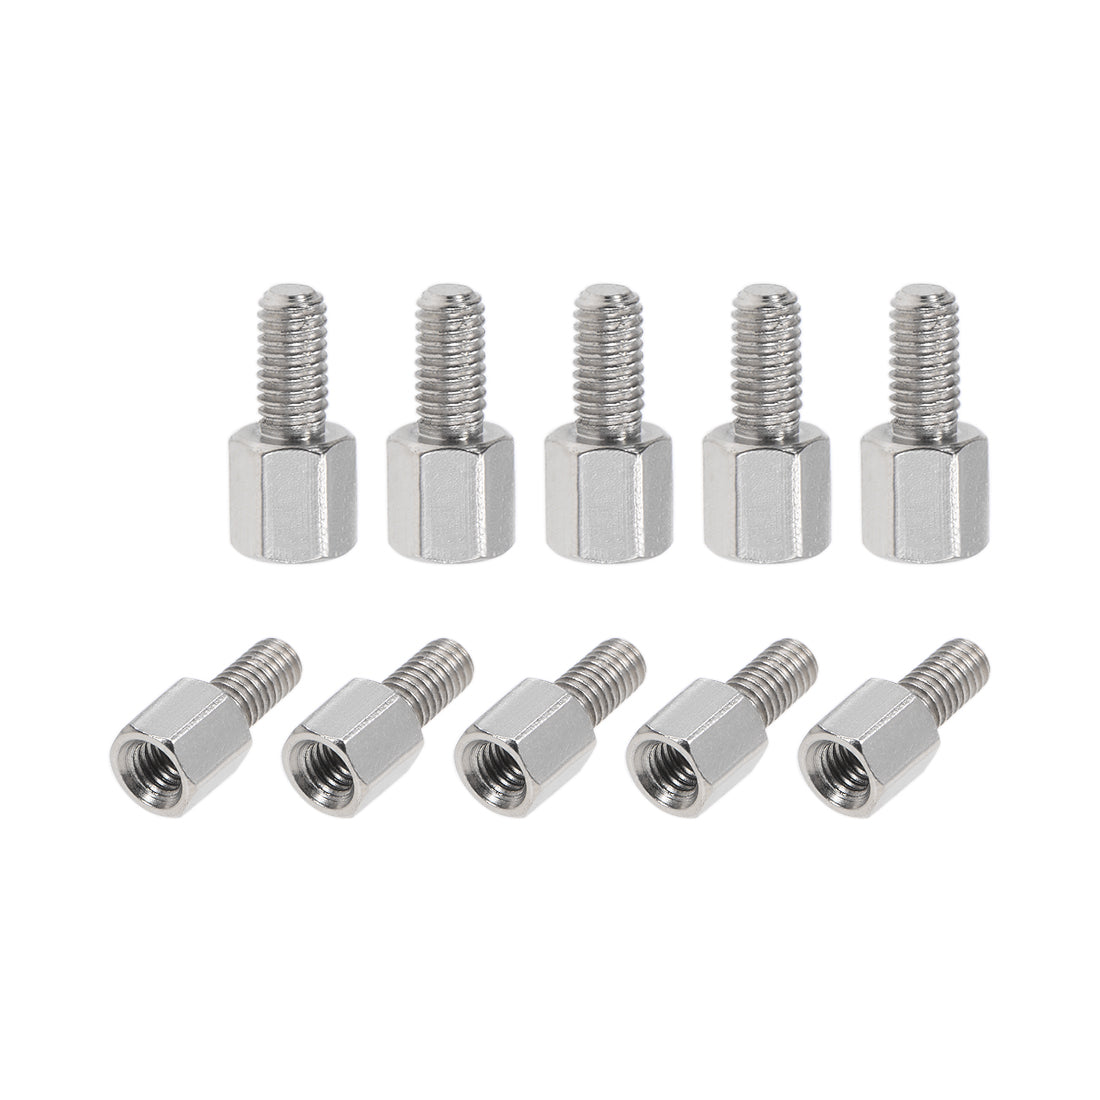 Uxcell Uxcell M3 x 45 mm + 6 mm Male to Female Hex Nickel Plated Spacer Standoff 10pcs